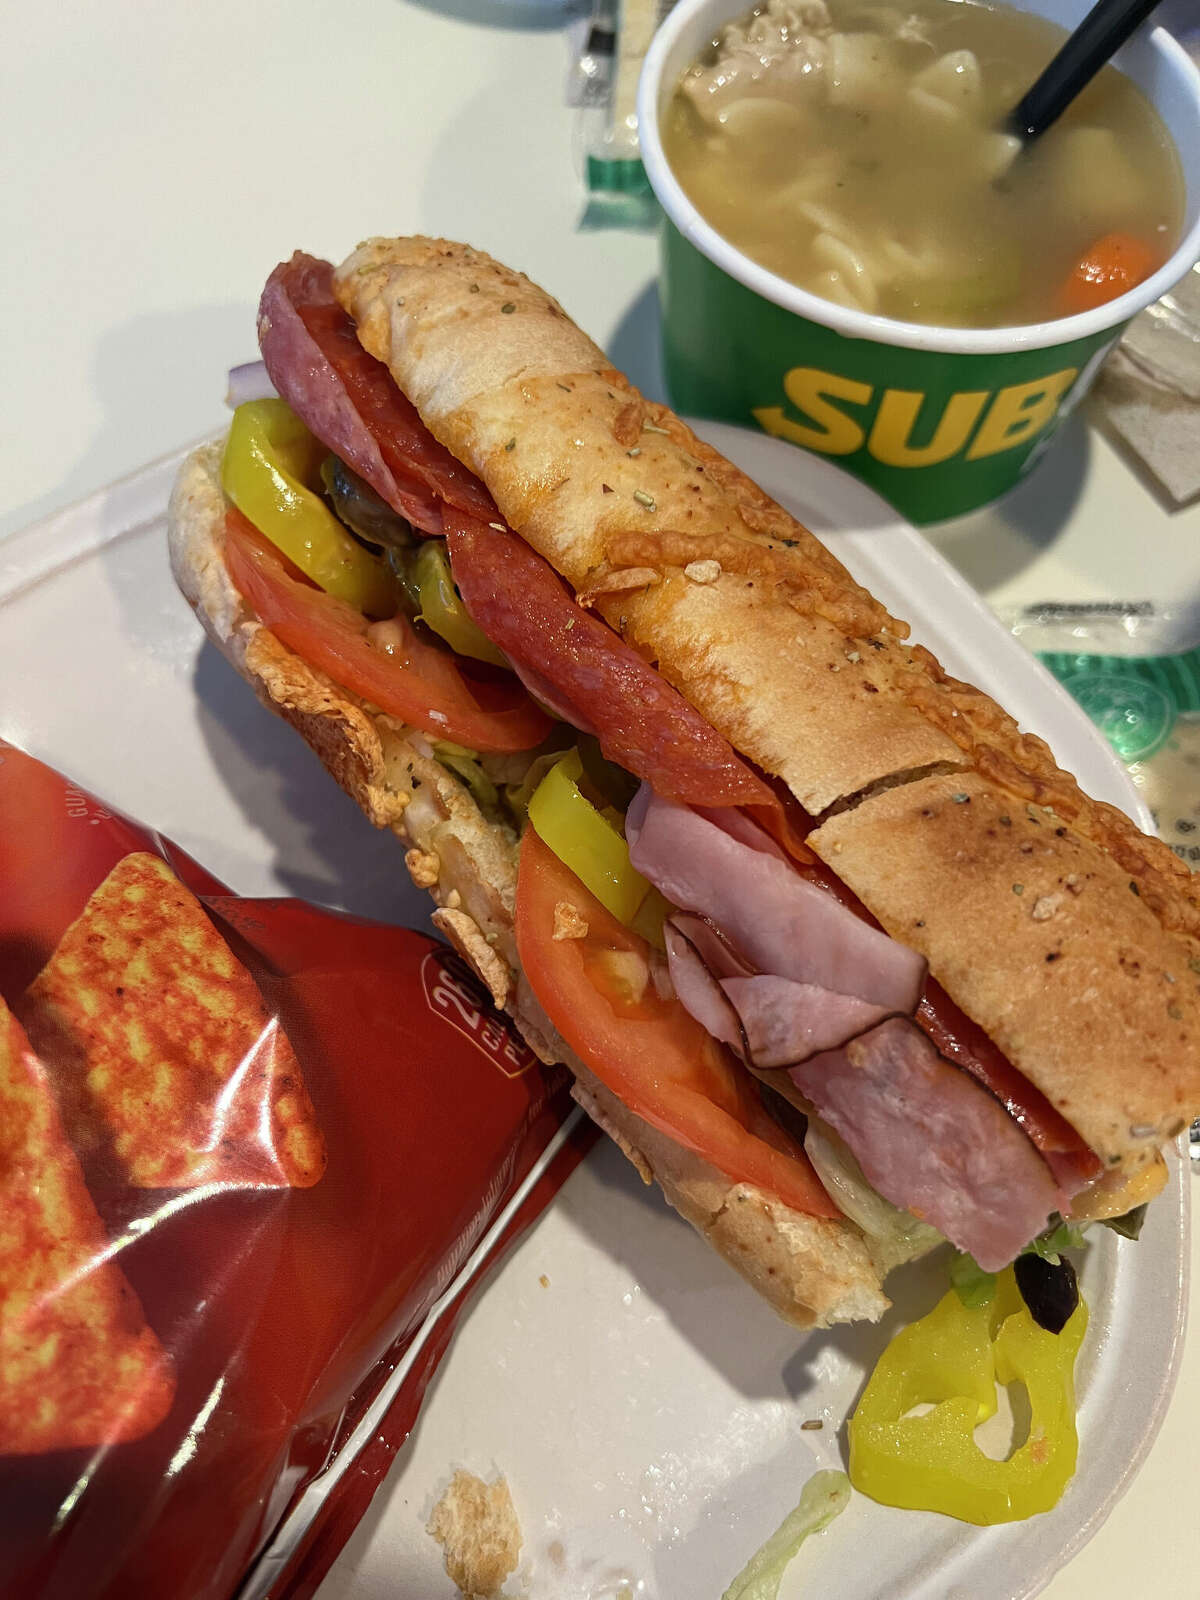 My go-to sub sandwich is Subway's Italian B.M.T., heated. This sandwich is an all-time Italian classic filled with Genoa salami, spicy pepperoni and Black Forest Ham. Then of course you choose your cheese, vegetables and condiments, served on freshly baked bread. For my Italian B.M.T., I chose the Italian Herb and Cheese bread, pepper jack cheese, lettuce, a couple slices of tomato, red onion, black olives, jalapenos and banana peppers. I also ordered Subway's chicken noodle soup and a bag of chips on the side.  